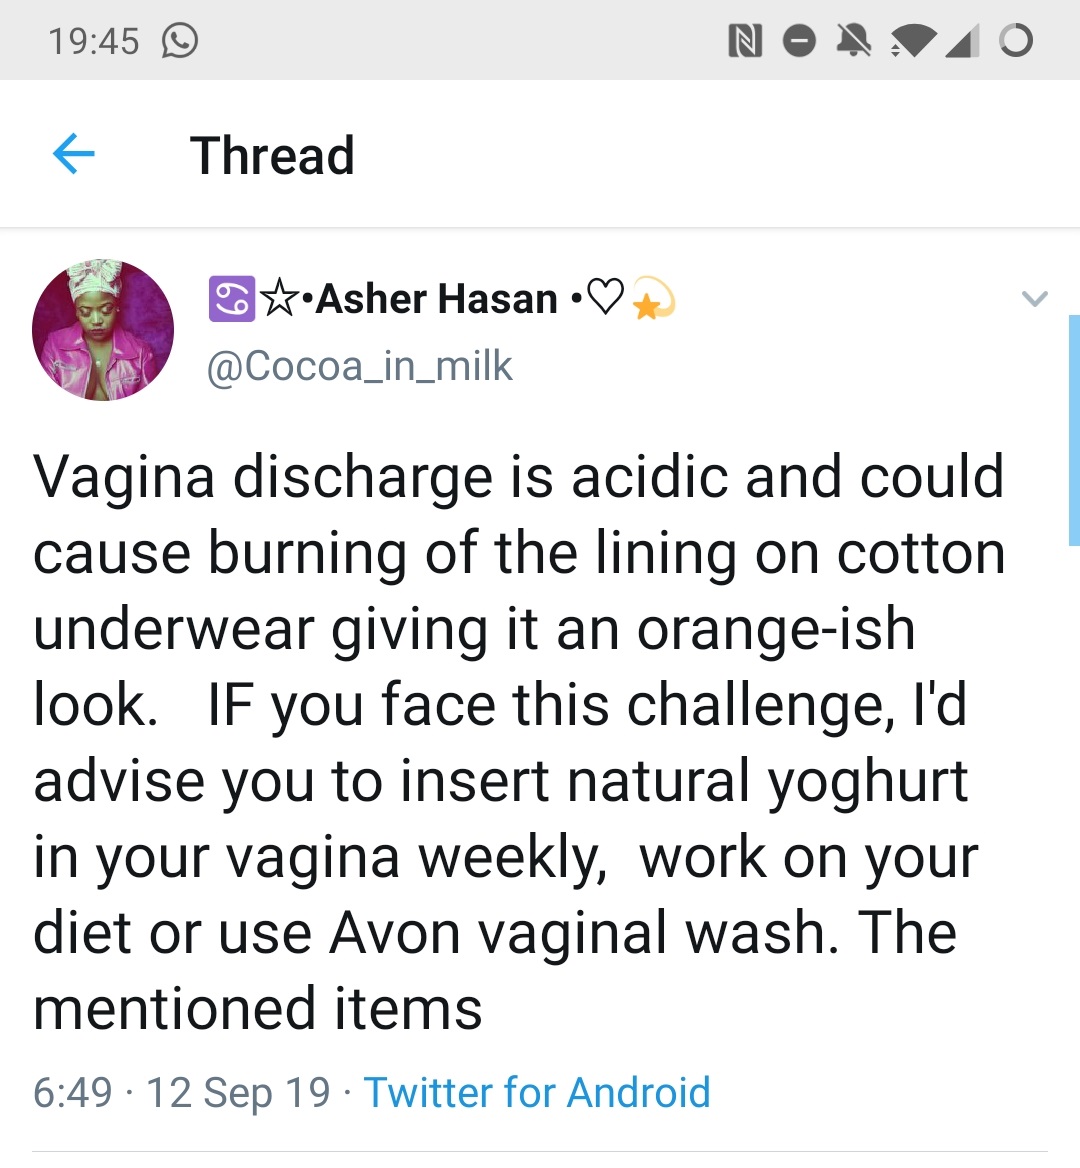 web page - No40 Thread Asher Hasan A Vagina discharge is acidic and could cause burning of the lining on cotton underwear giving it an orangeish look. If you face this challenge, I'd advise you to insert natural yoghurt in your vagina weekly, work on your